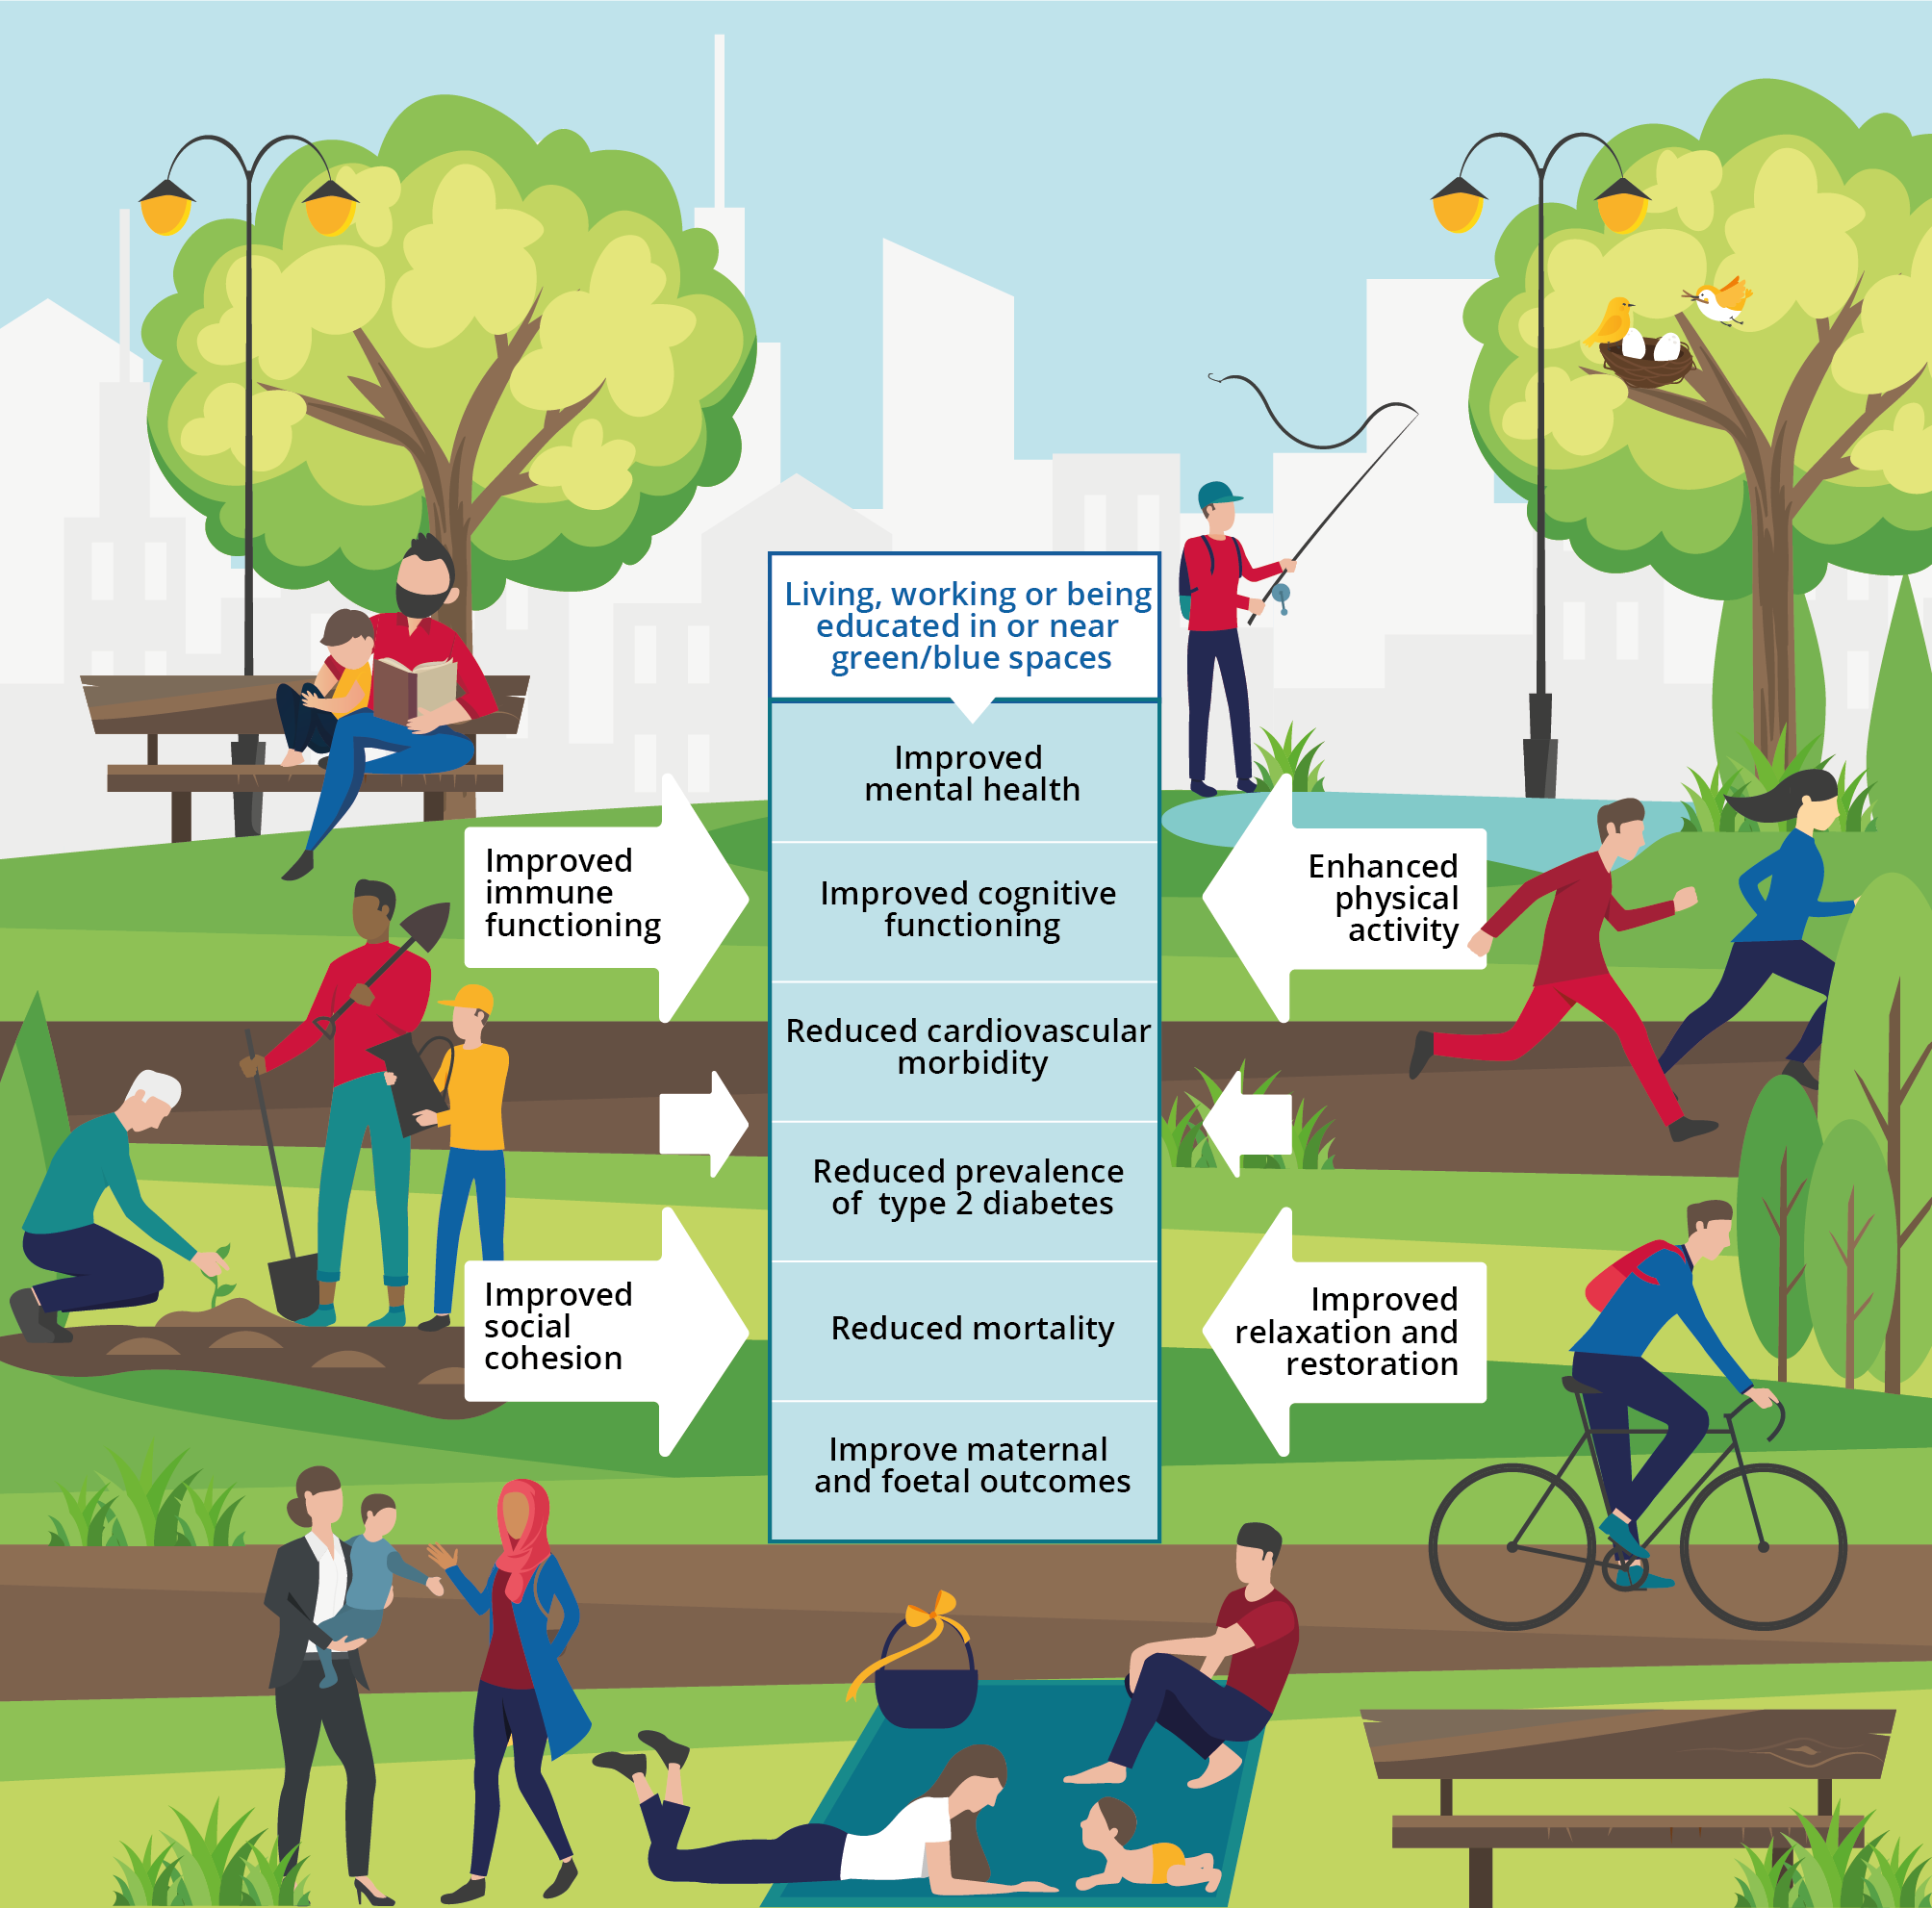 How green are European cities? Green space key to well-being – but access varies